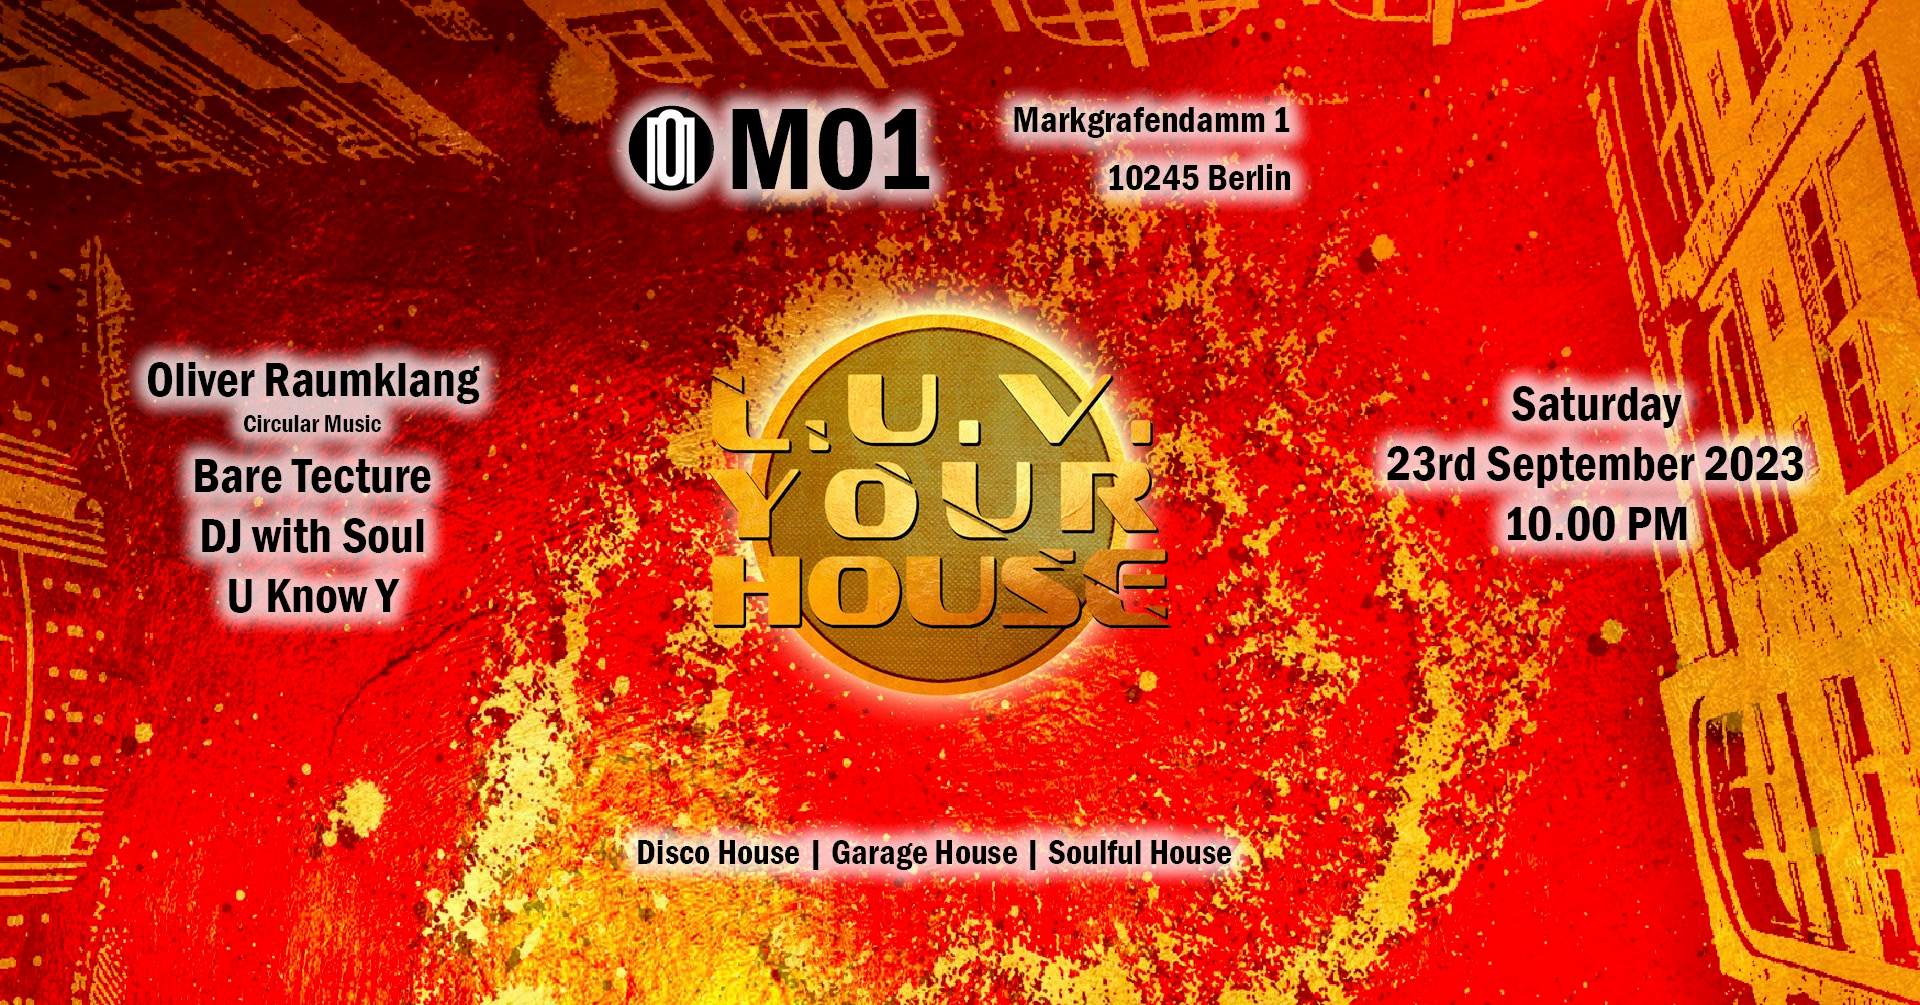 L.U.V. YOUR HOUSE # House Music : Oliver Raumklang, Bare Tecture, DJ with Soul, U Know Y, LUV - Página frontal